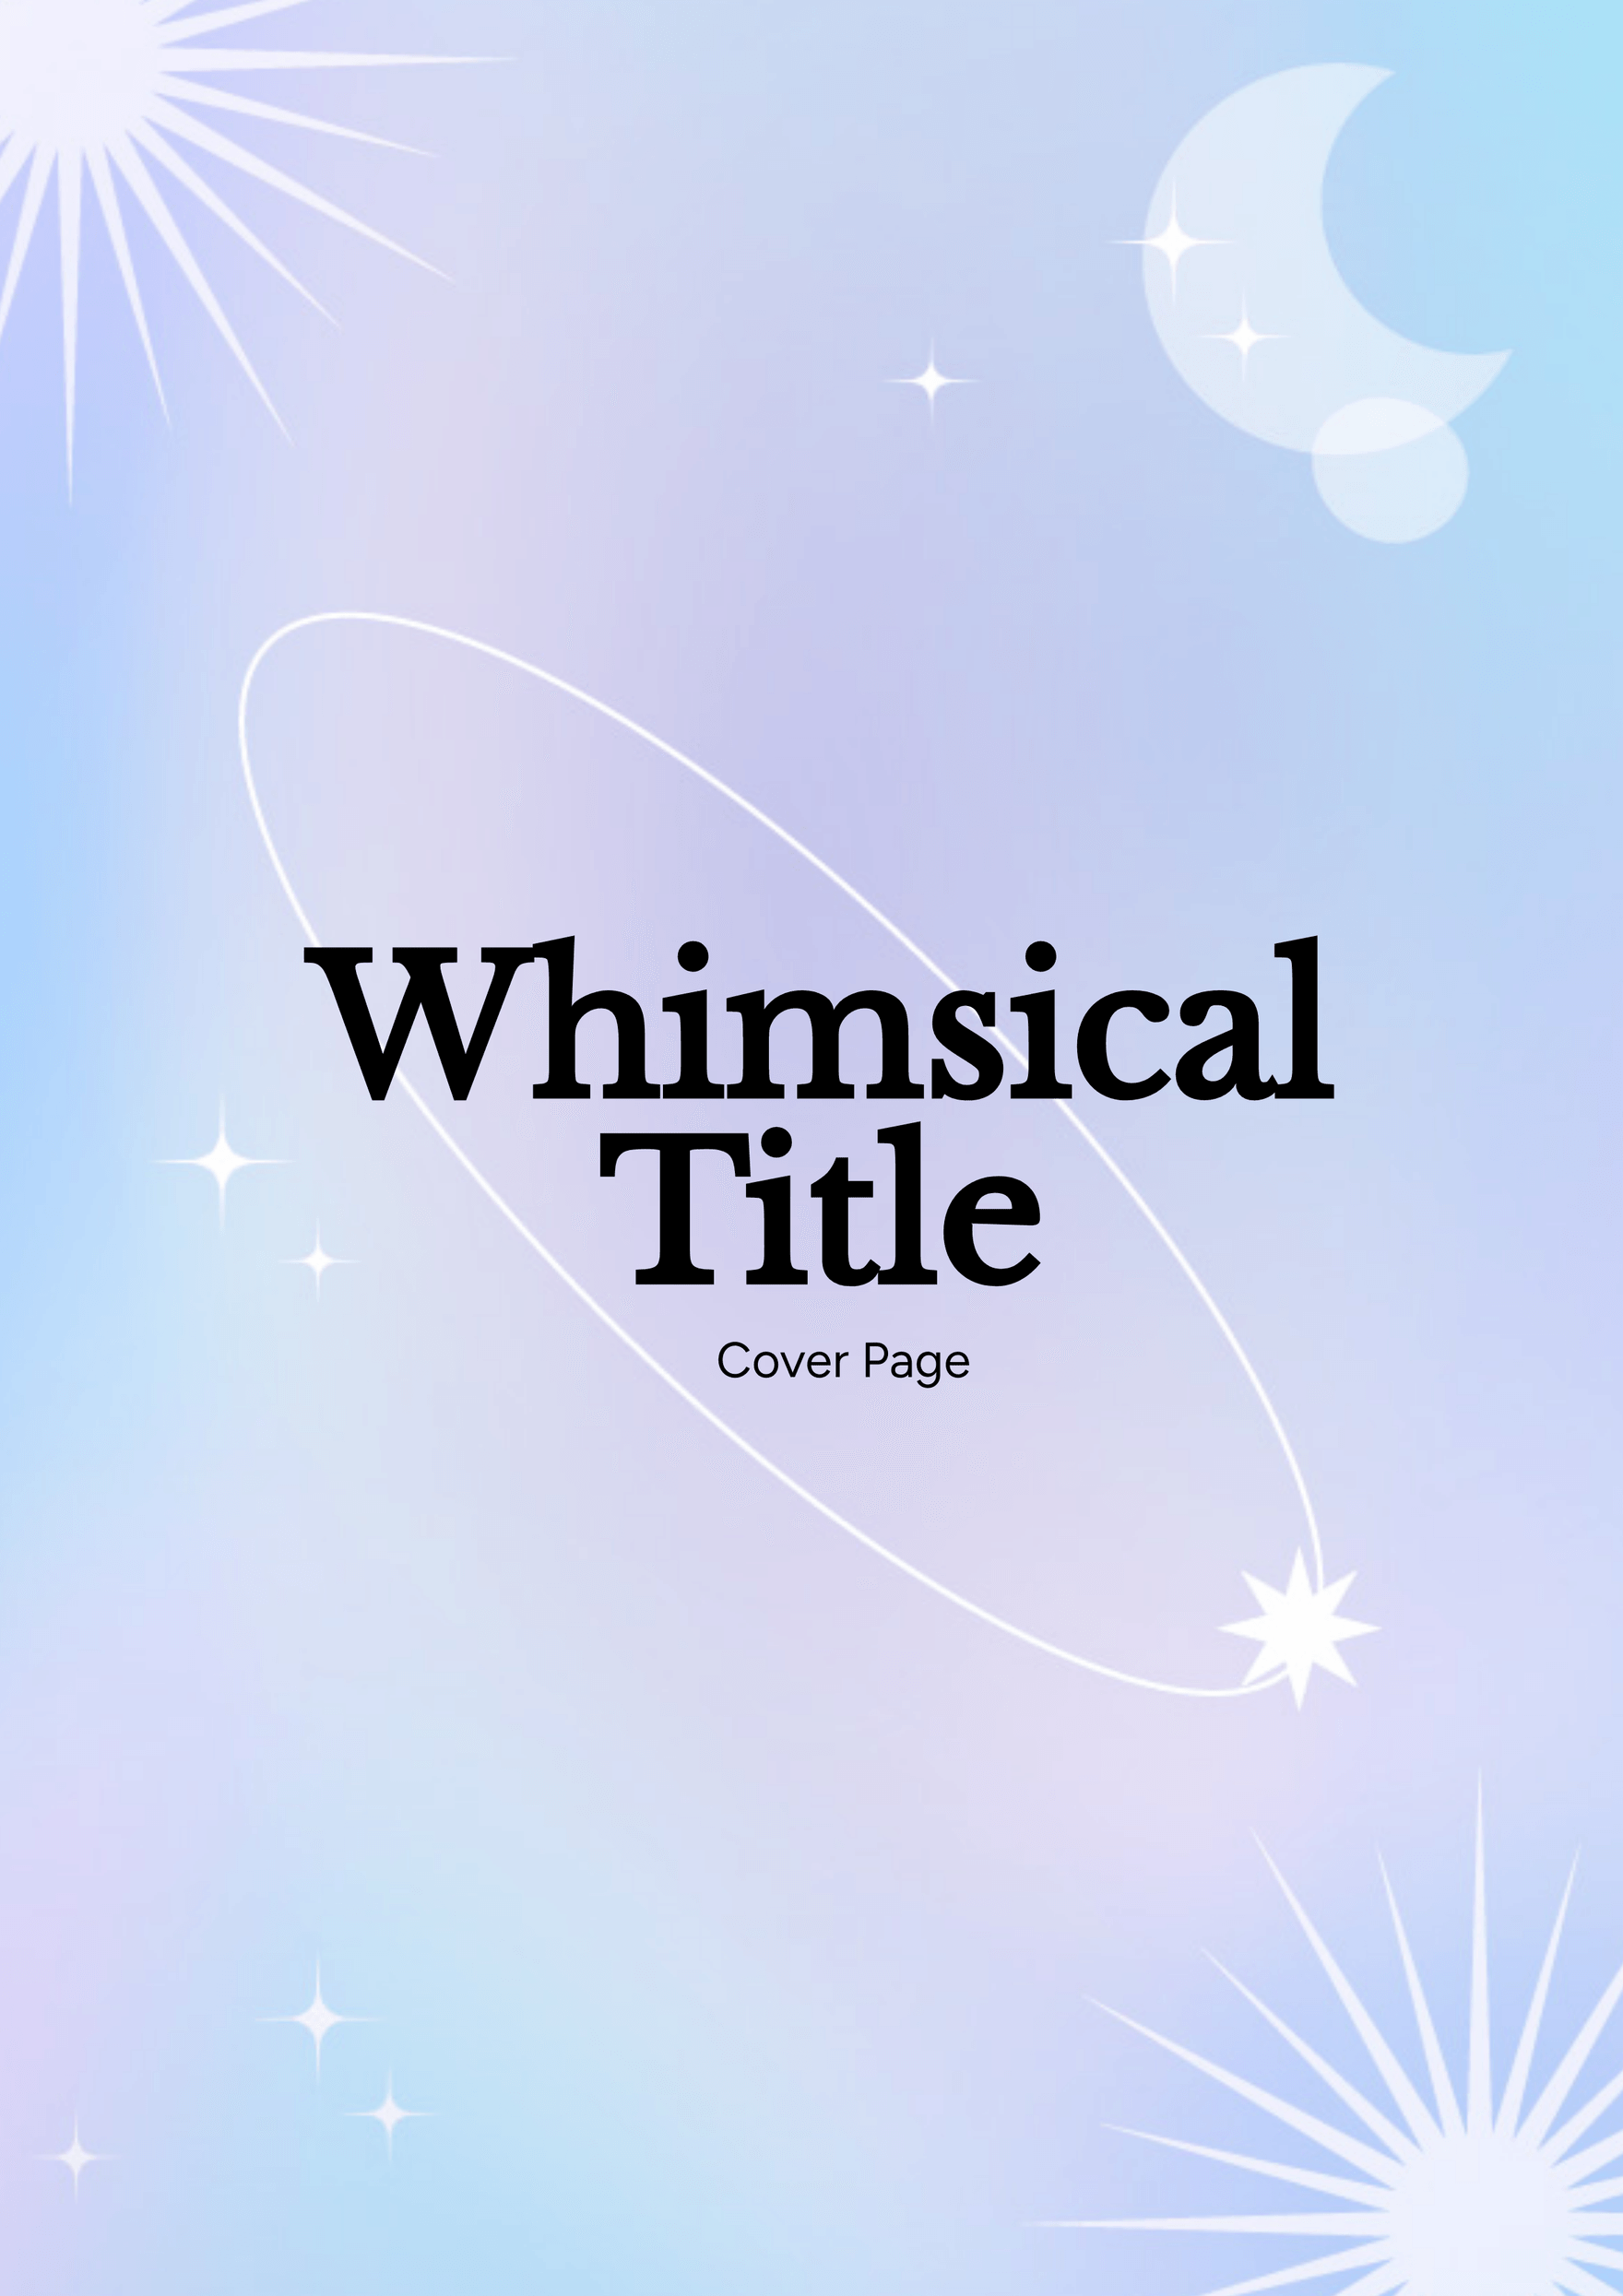 Whimsical Title Cover Page